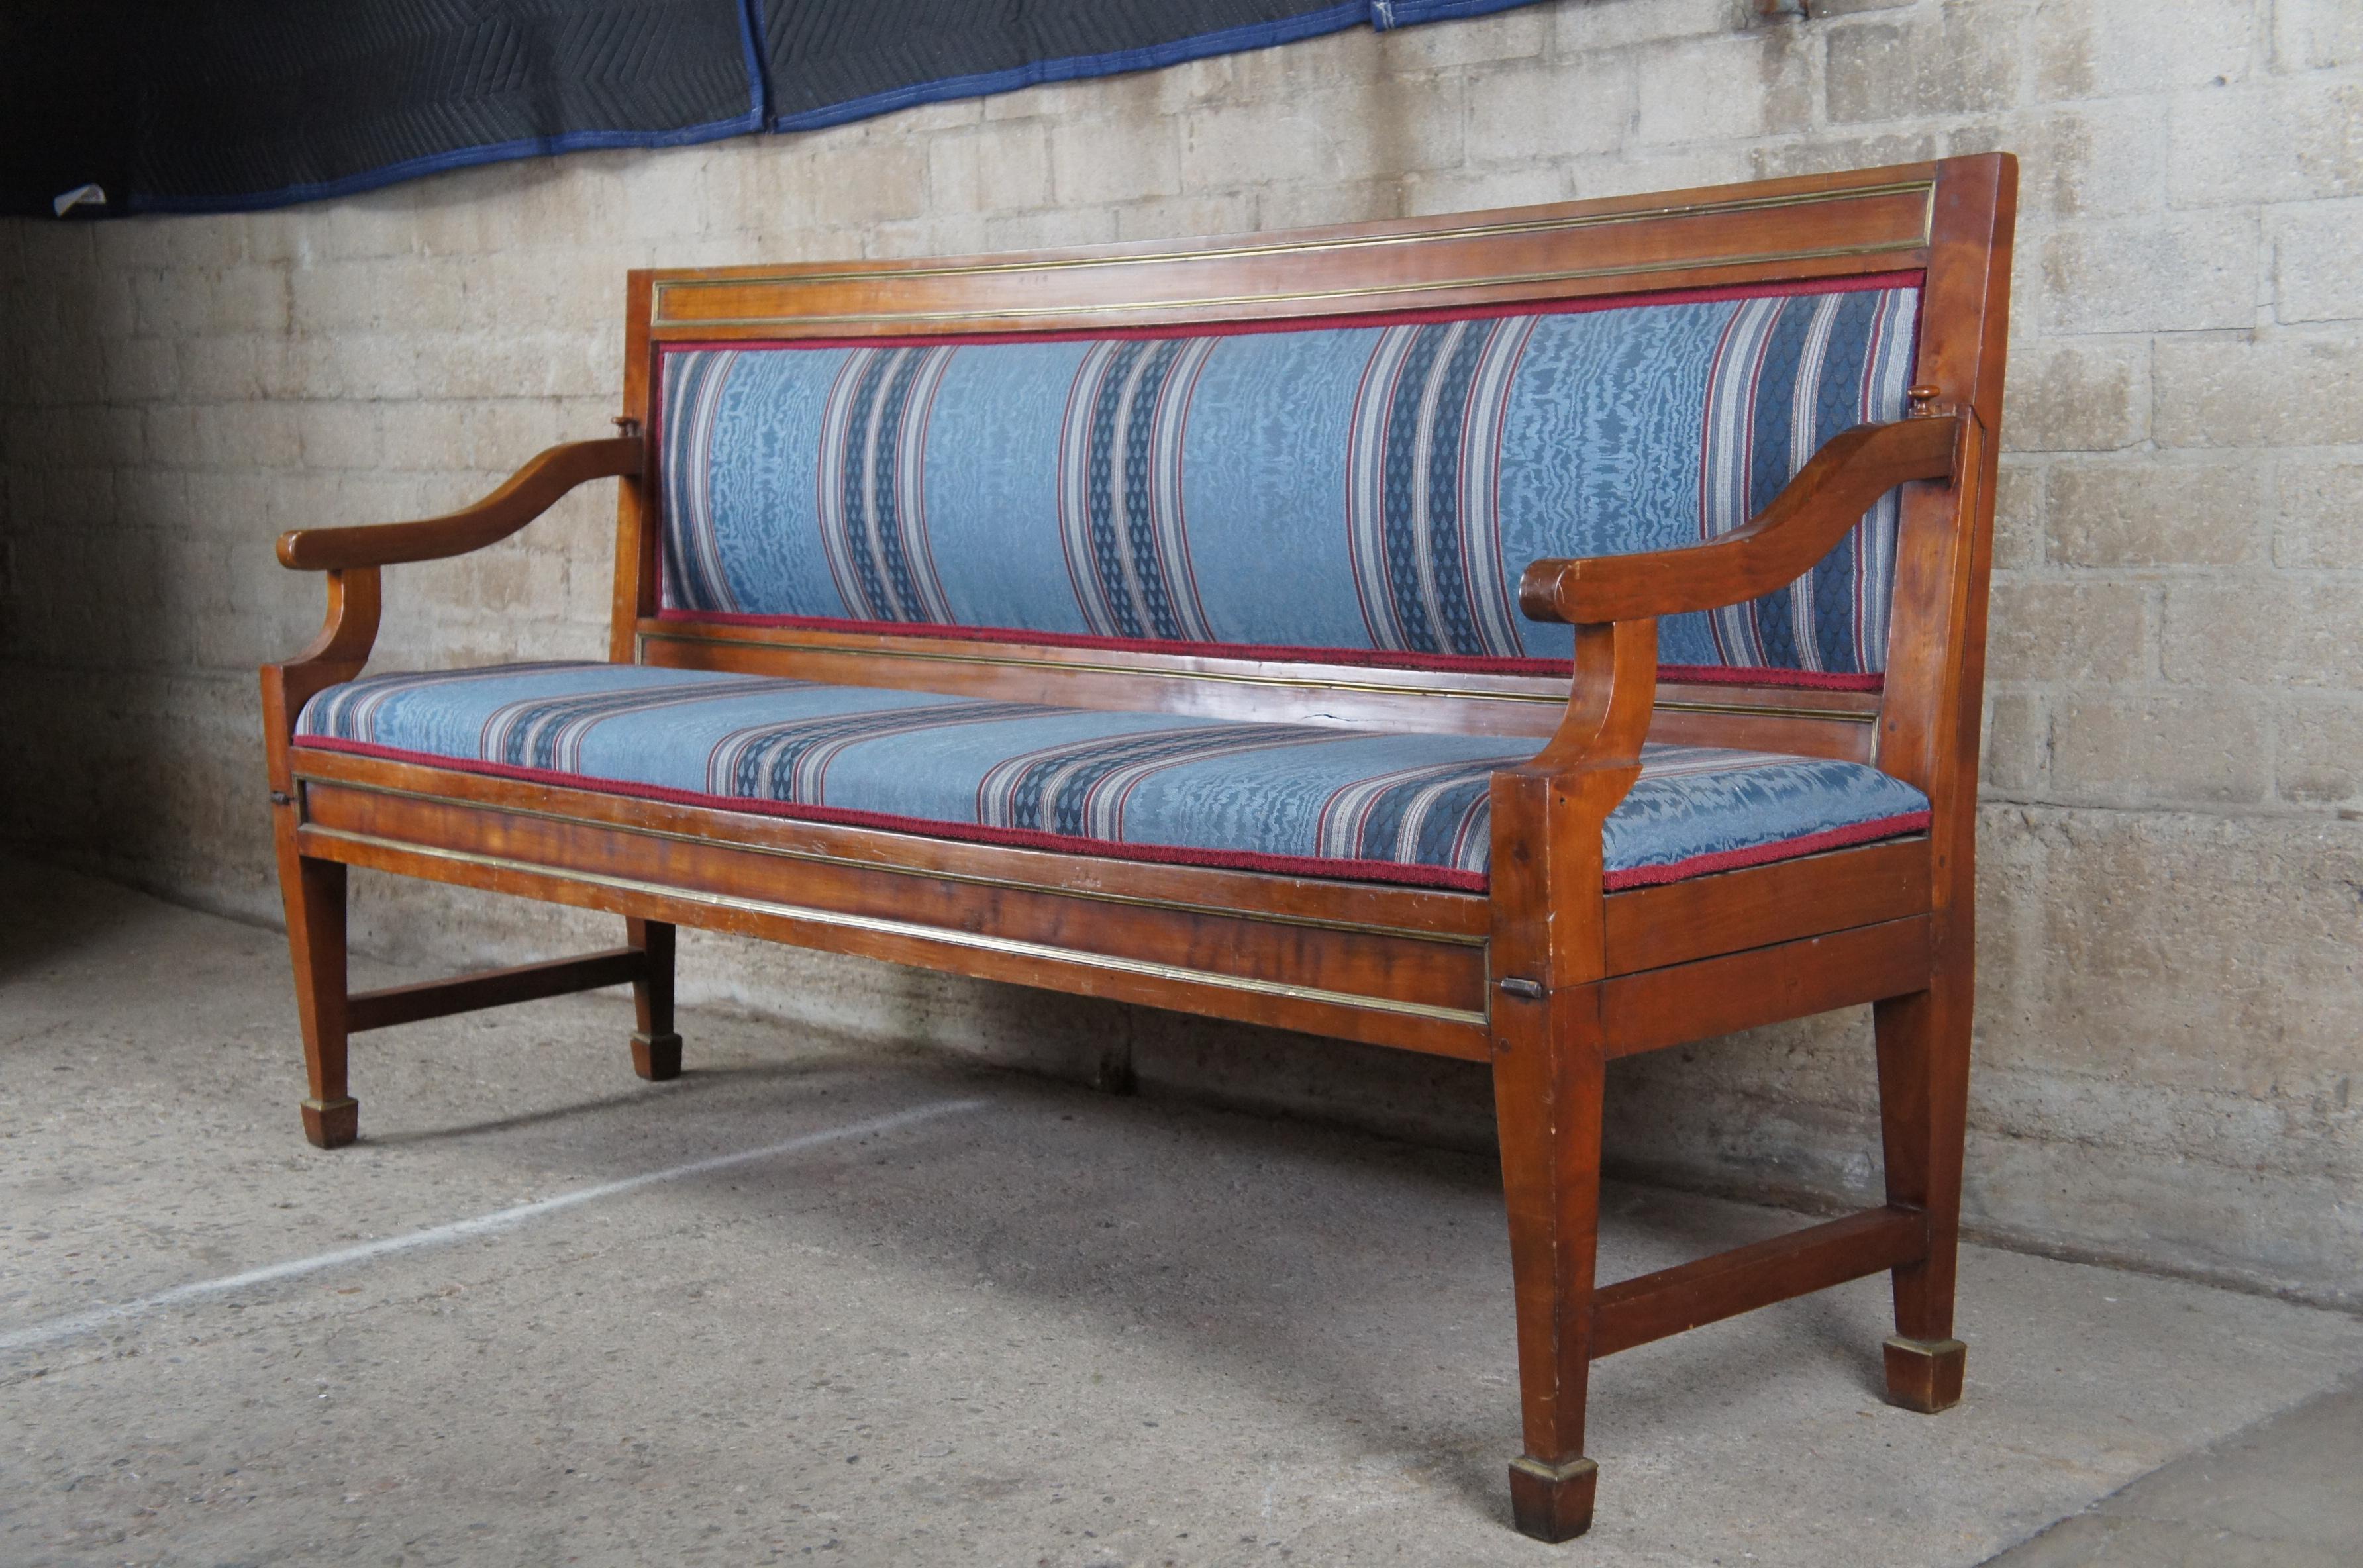 Antique English Regency Mahogany Folding Bench Loveseat Sleeper Sofa Campaign In Good Condition For Sale In Dayton, OH